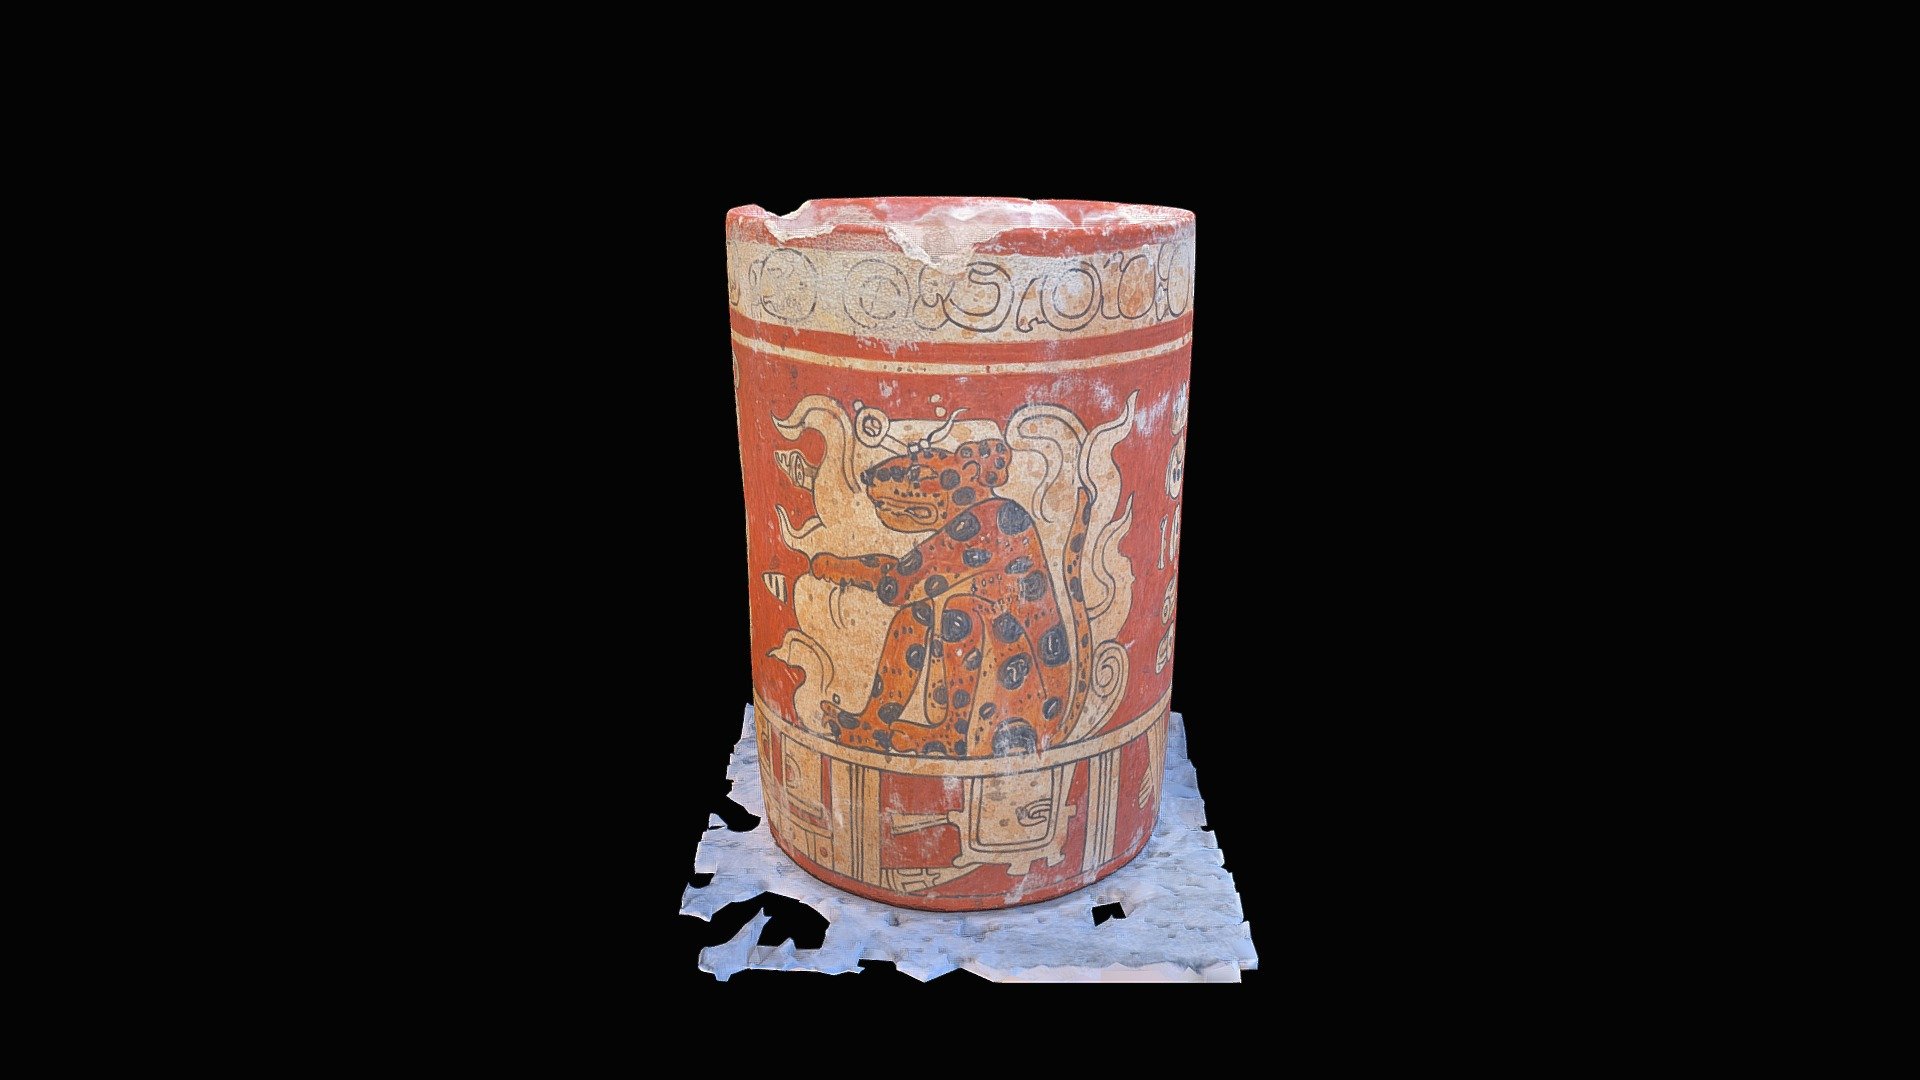 The original piece, a museum-quality mayan ceramic replica from the Yucatan (Mexico), was scanned as part of our tests of improved gear, methodologies, and post production/cleaning tools. This particular version was scanned using the Reality Scan app. We plan to clean the base using Blender or similar 3d model